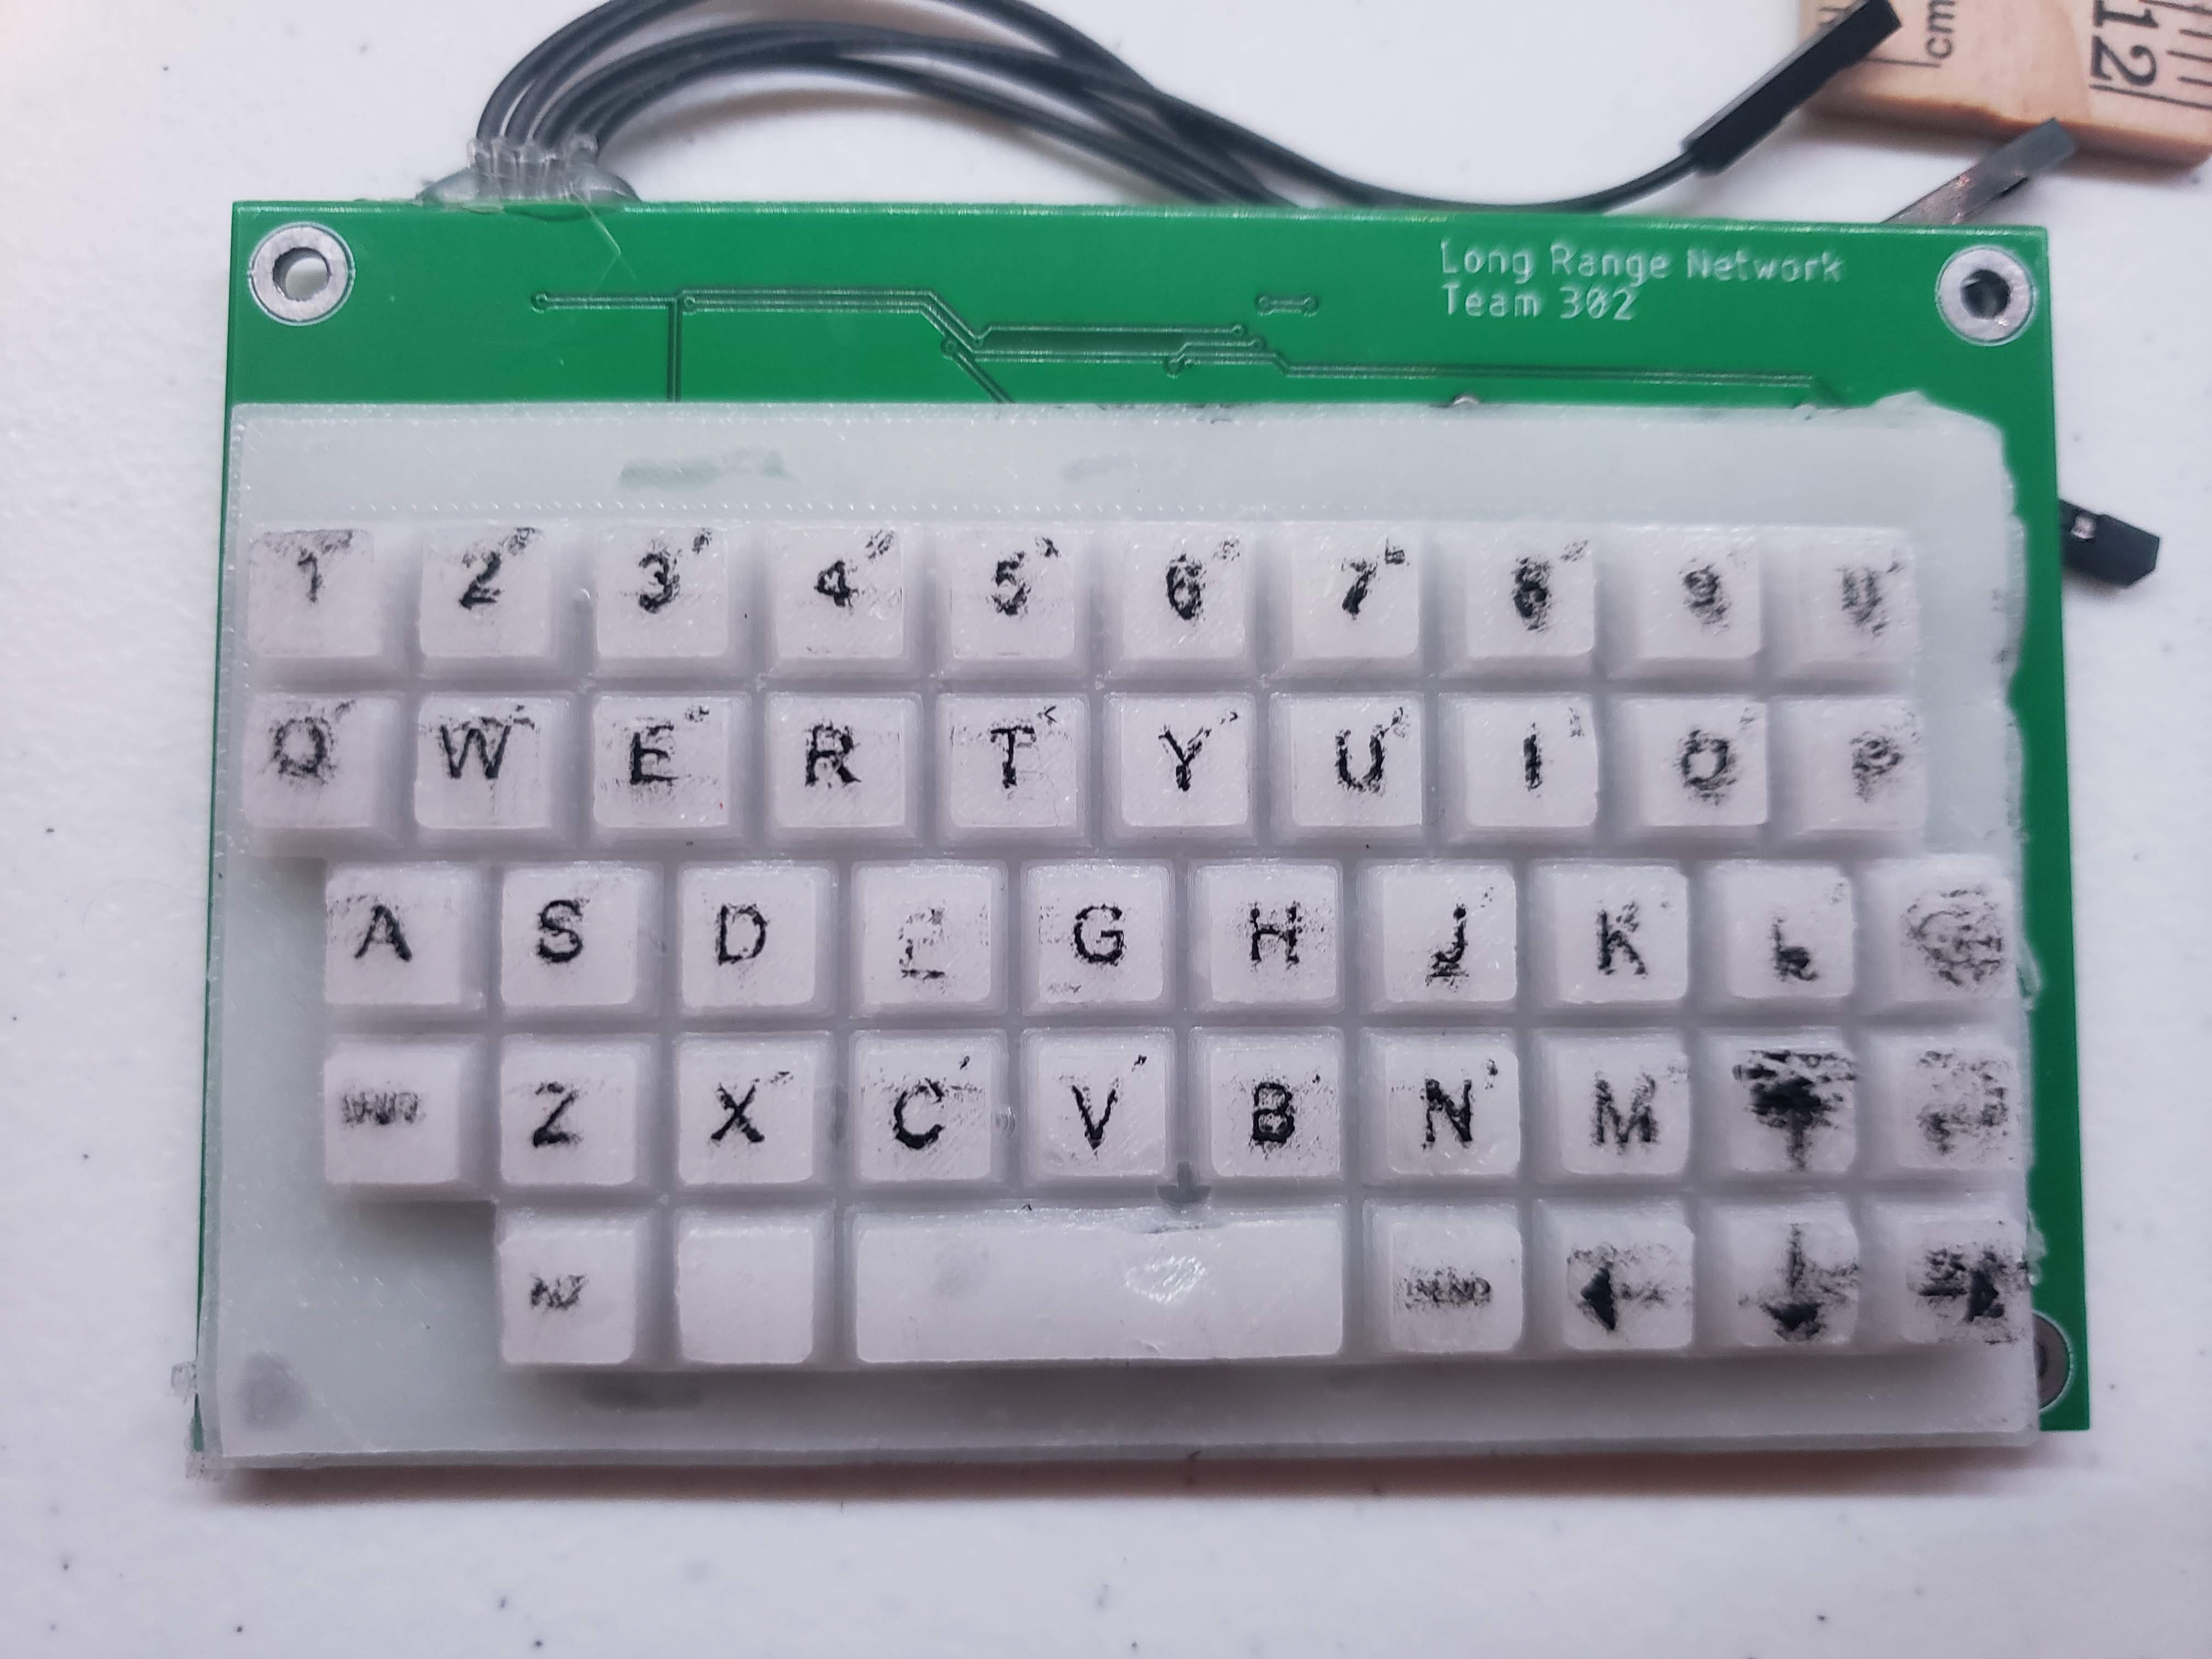 Keyboard with Cover